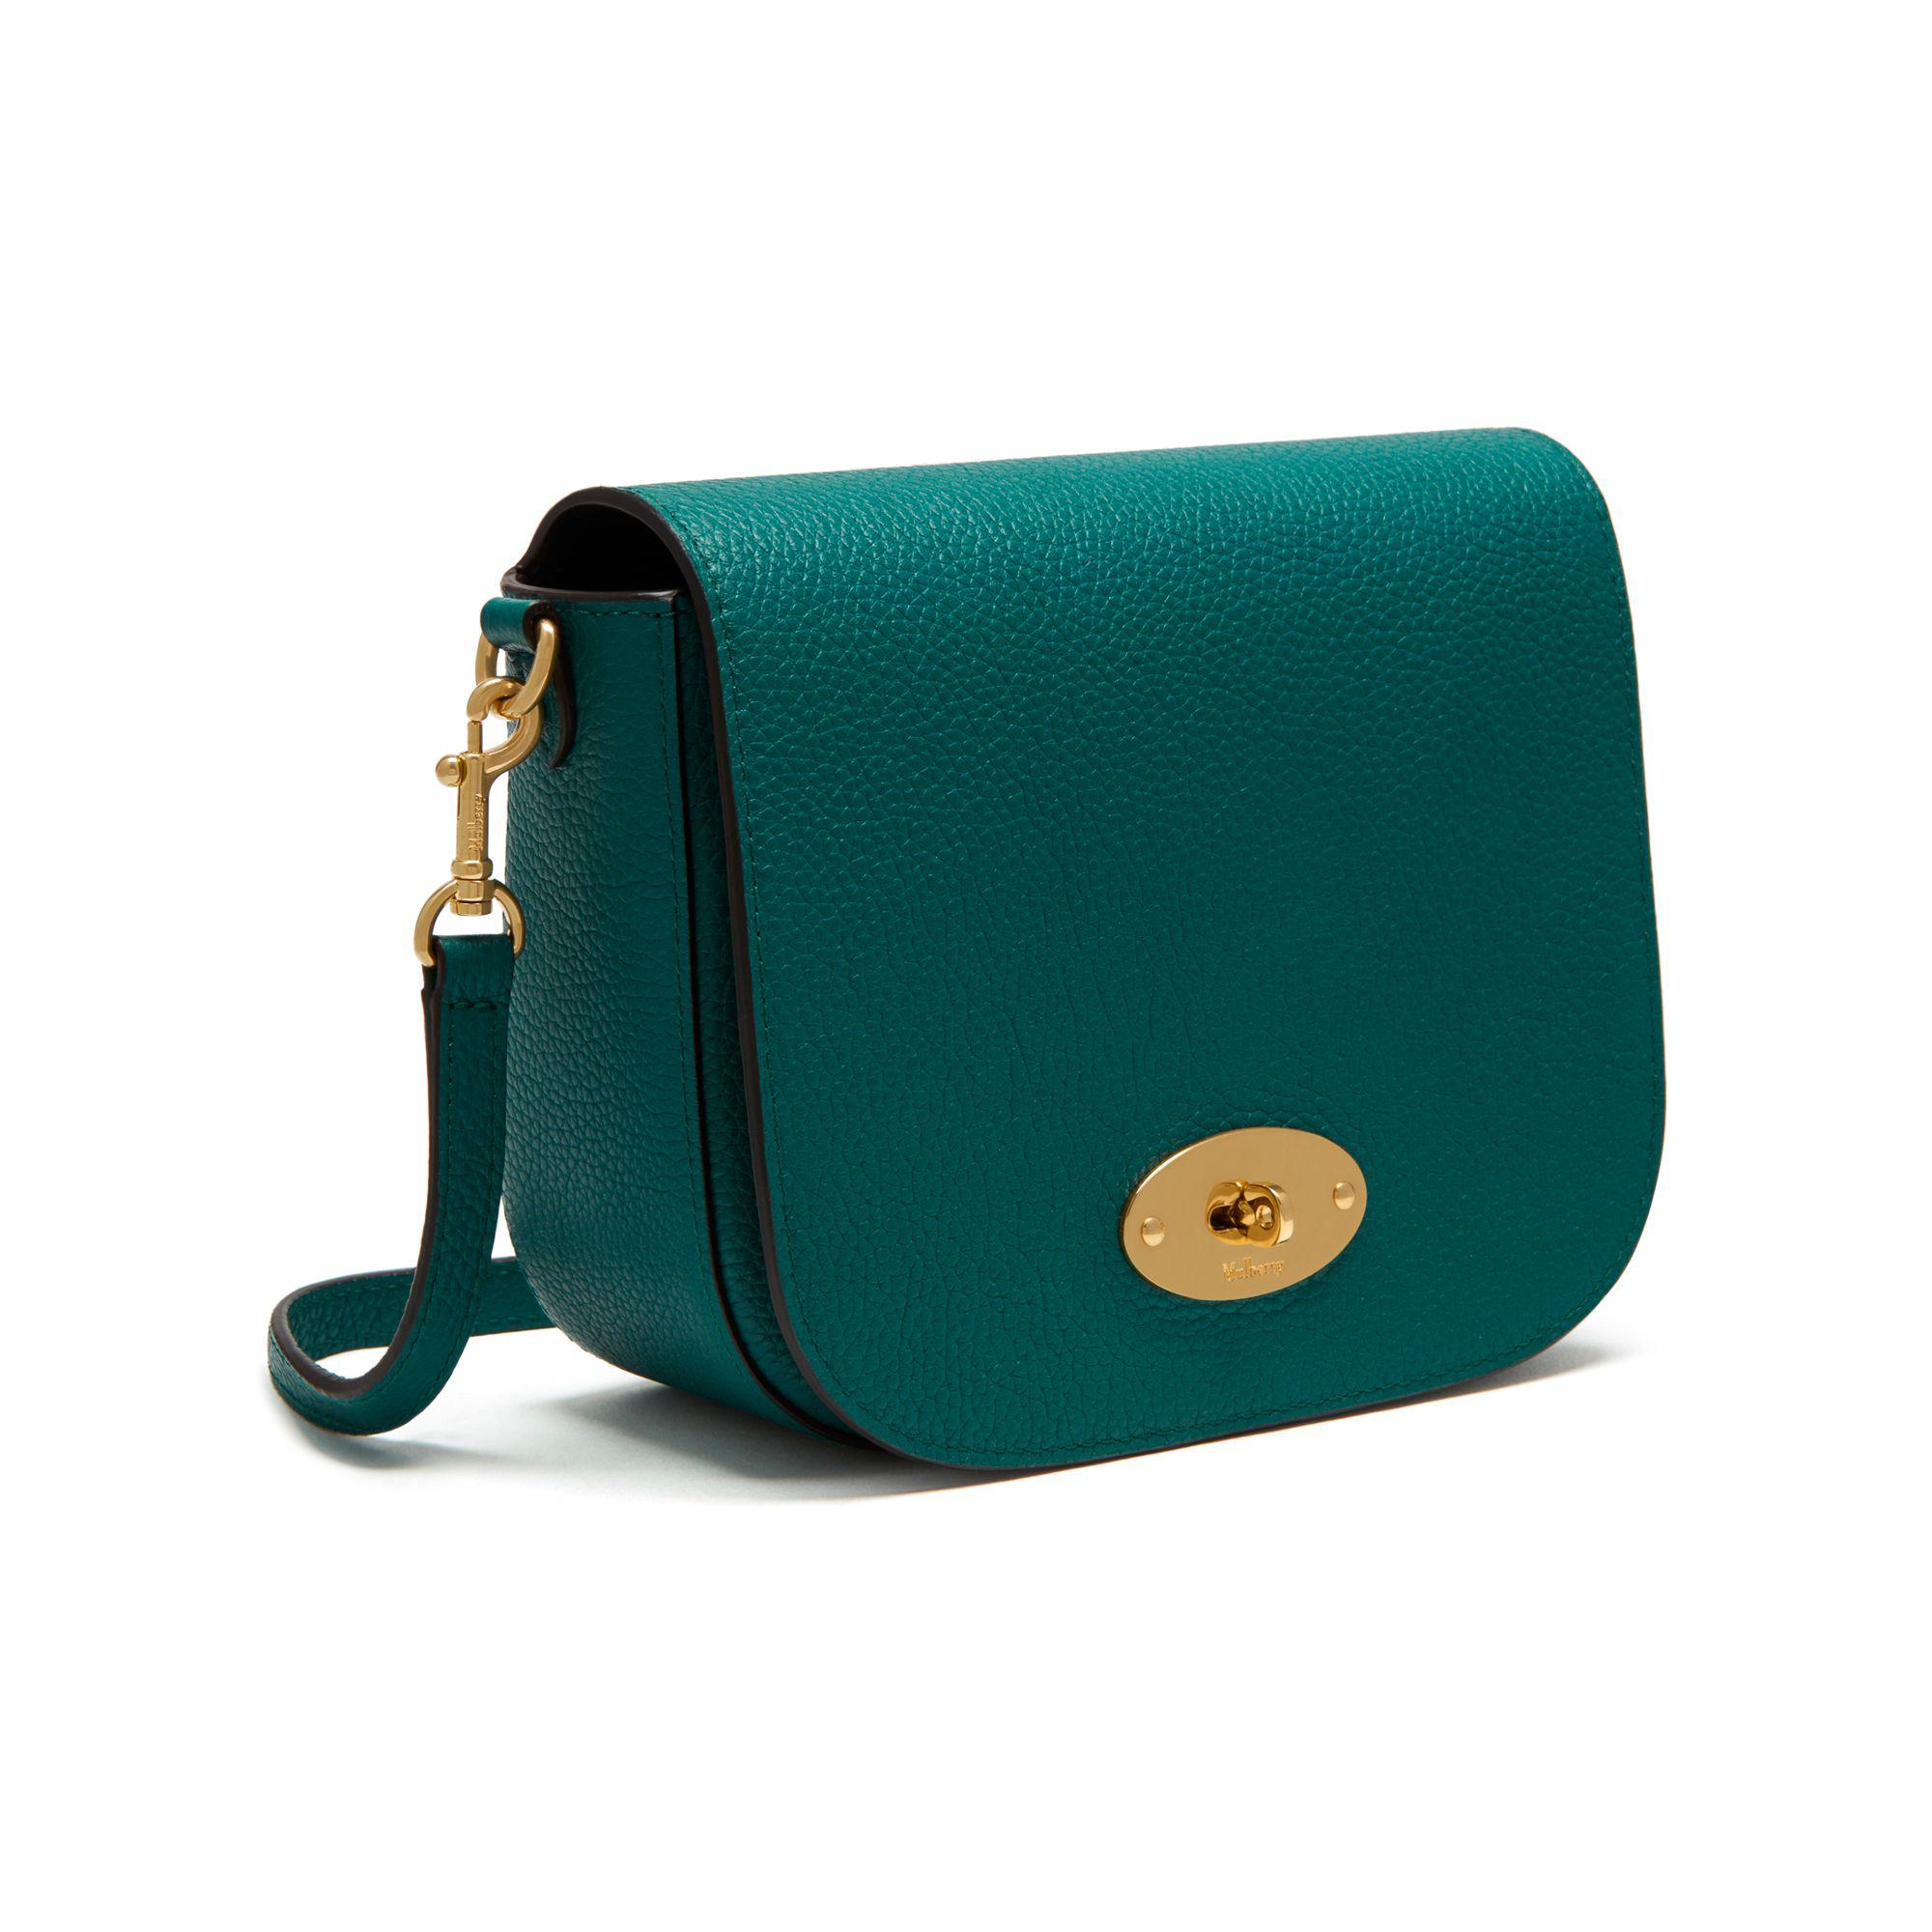 Lyst - Mulberry Small Darley Satchel in Green